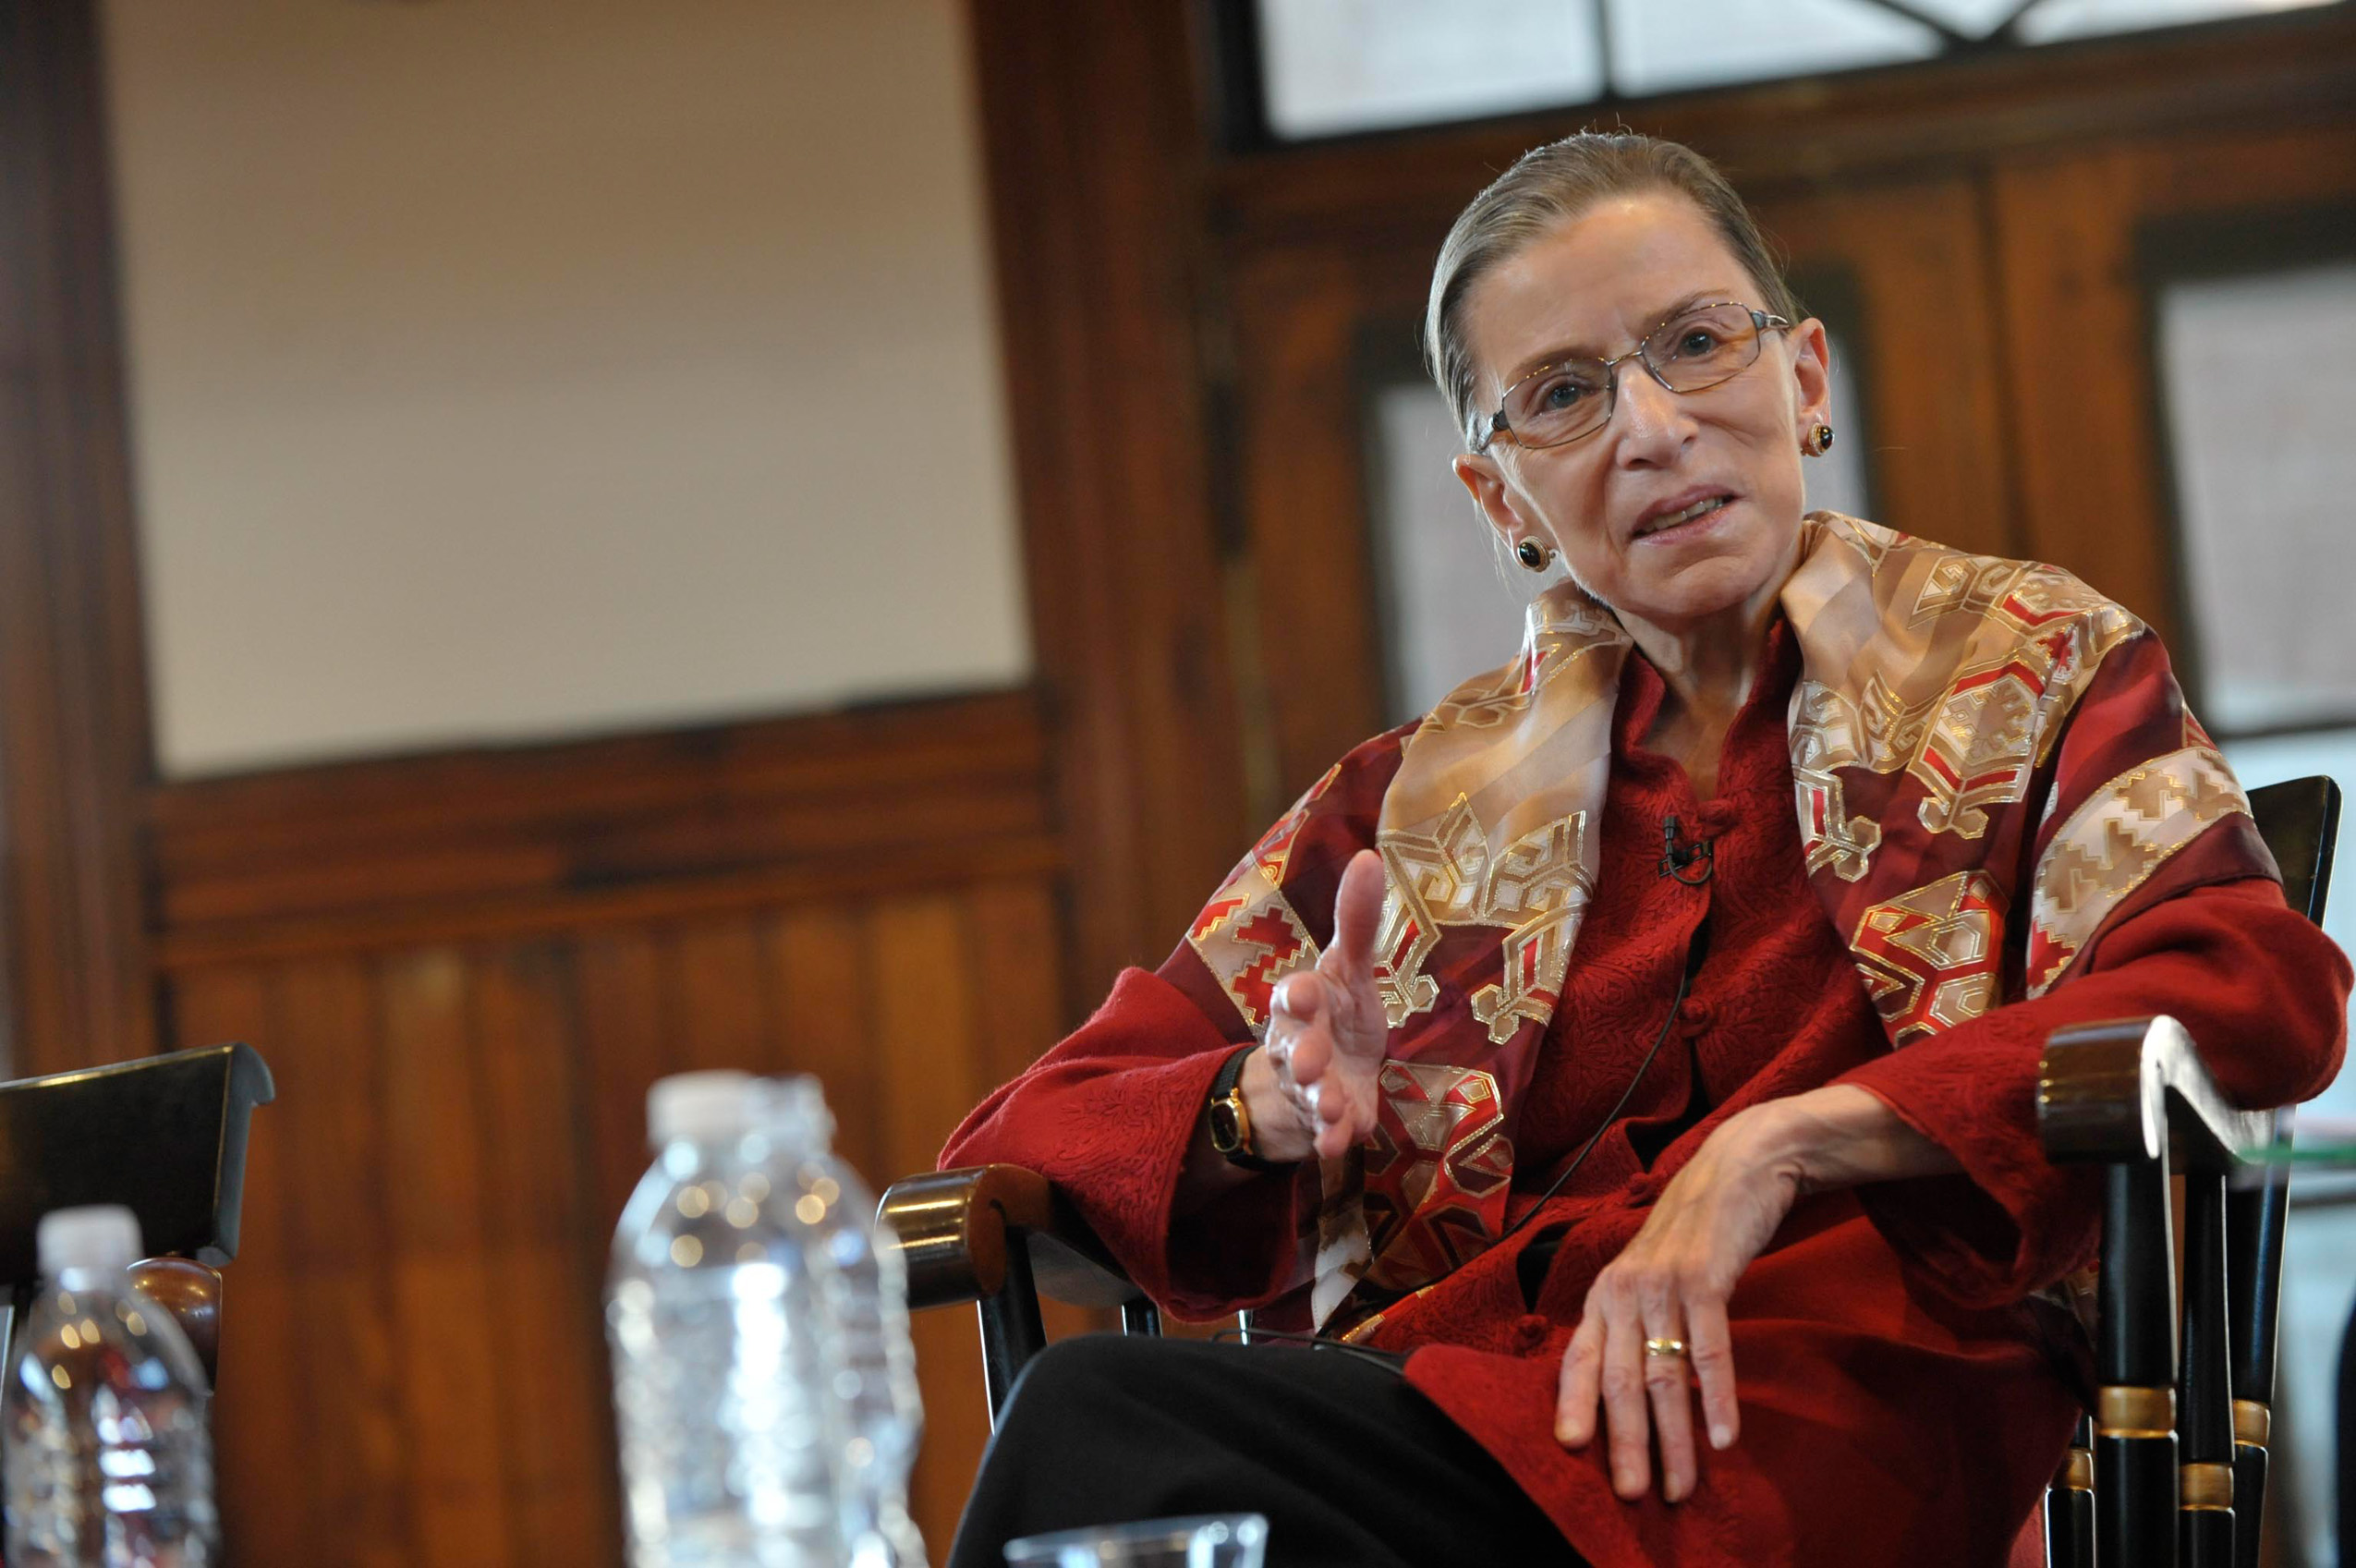 Ruth Bader Ginsburg dressed in red jacket and khaki scarf sitting and speaking.